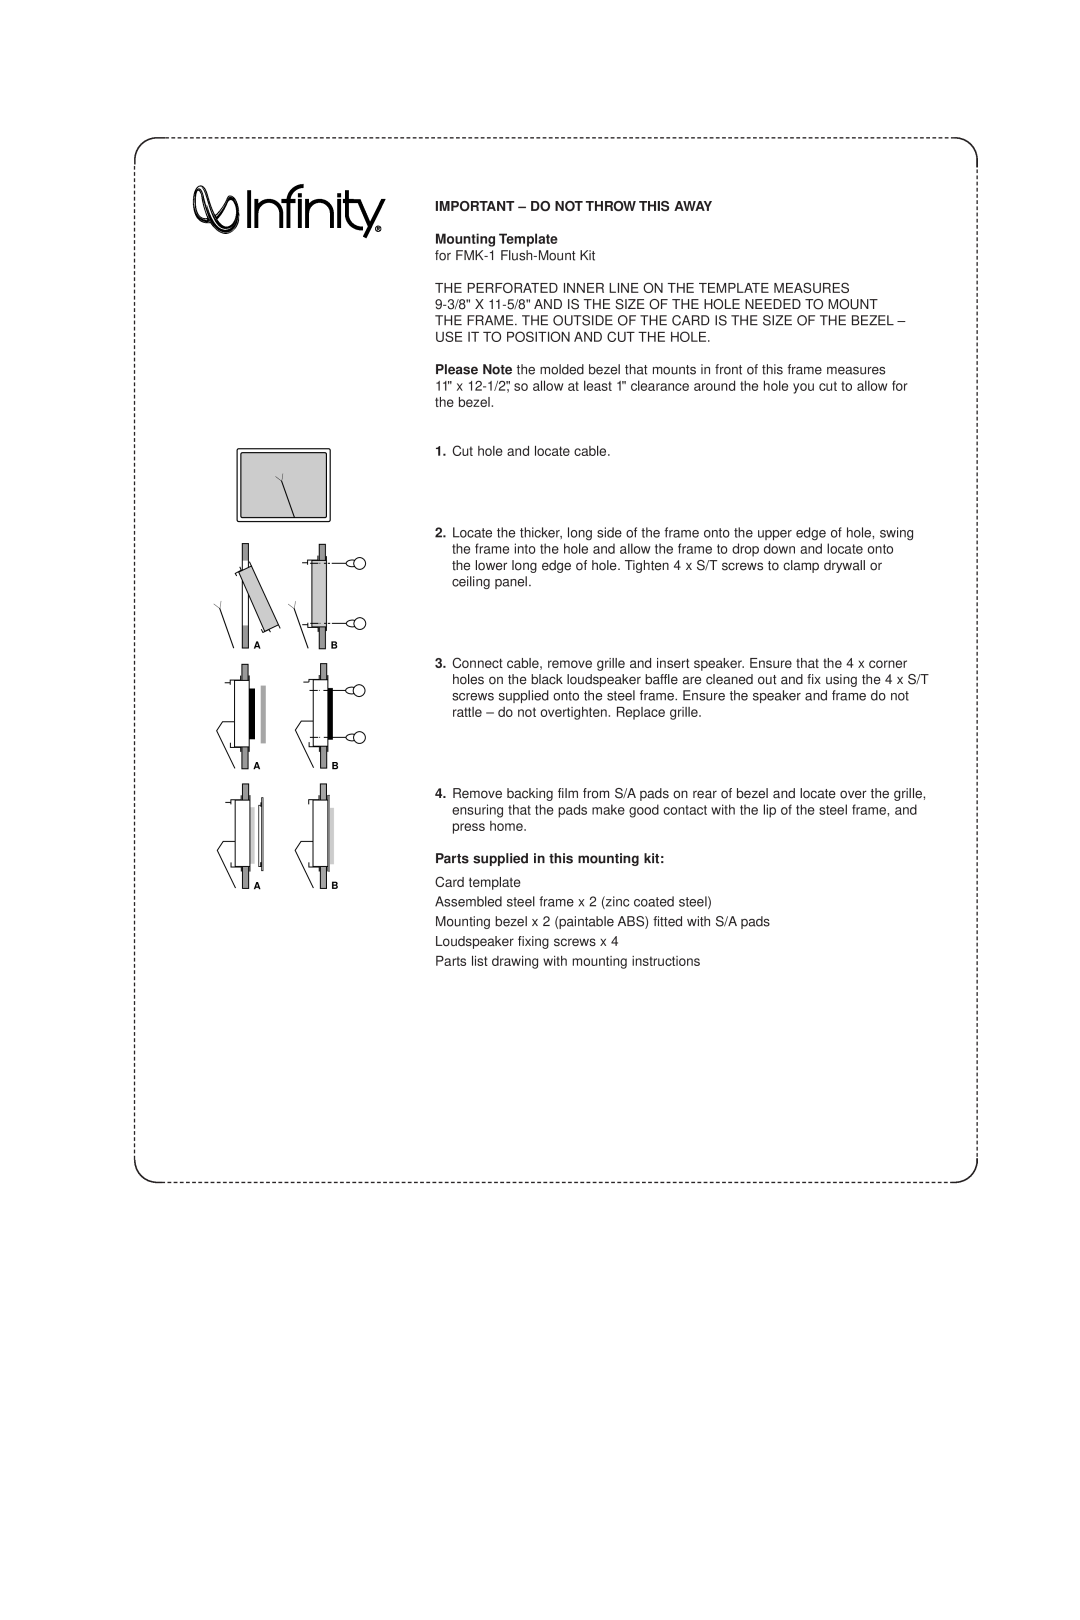 Infinity FMK-1 manual Powered Subwoofer, IMPORTANT - DO NOT THROW THIS AWAY Mounting Template 